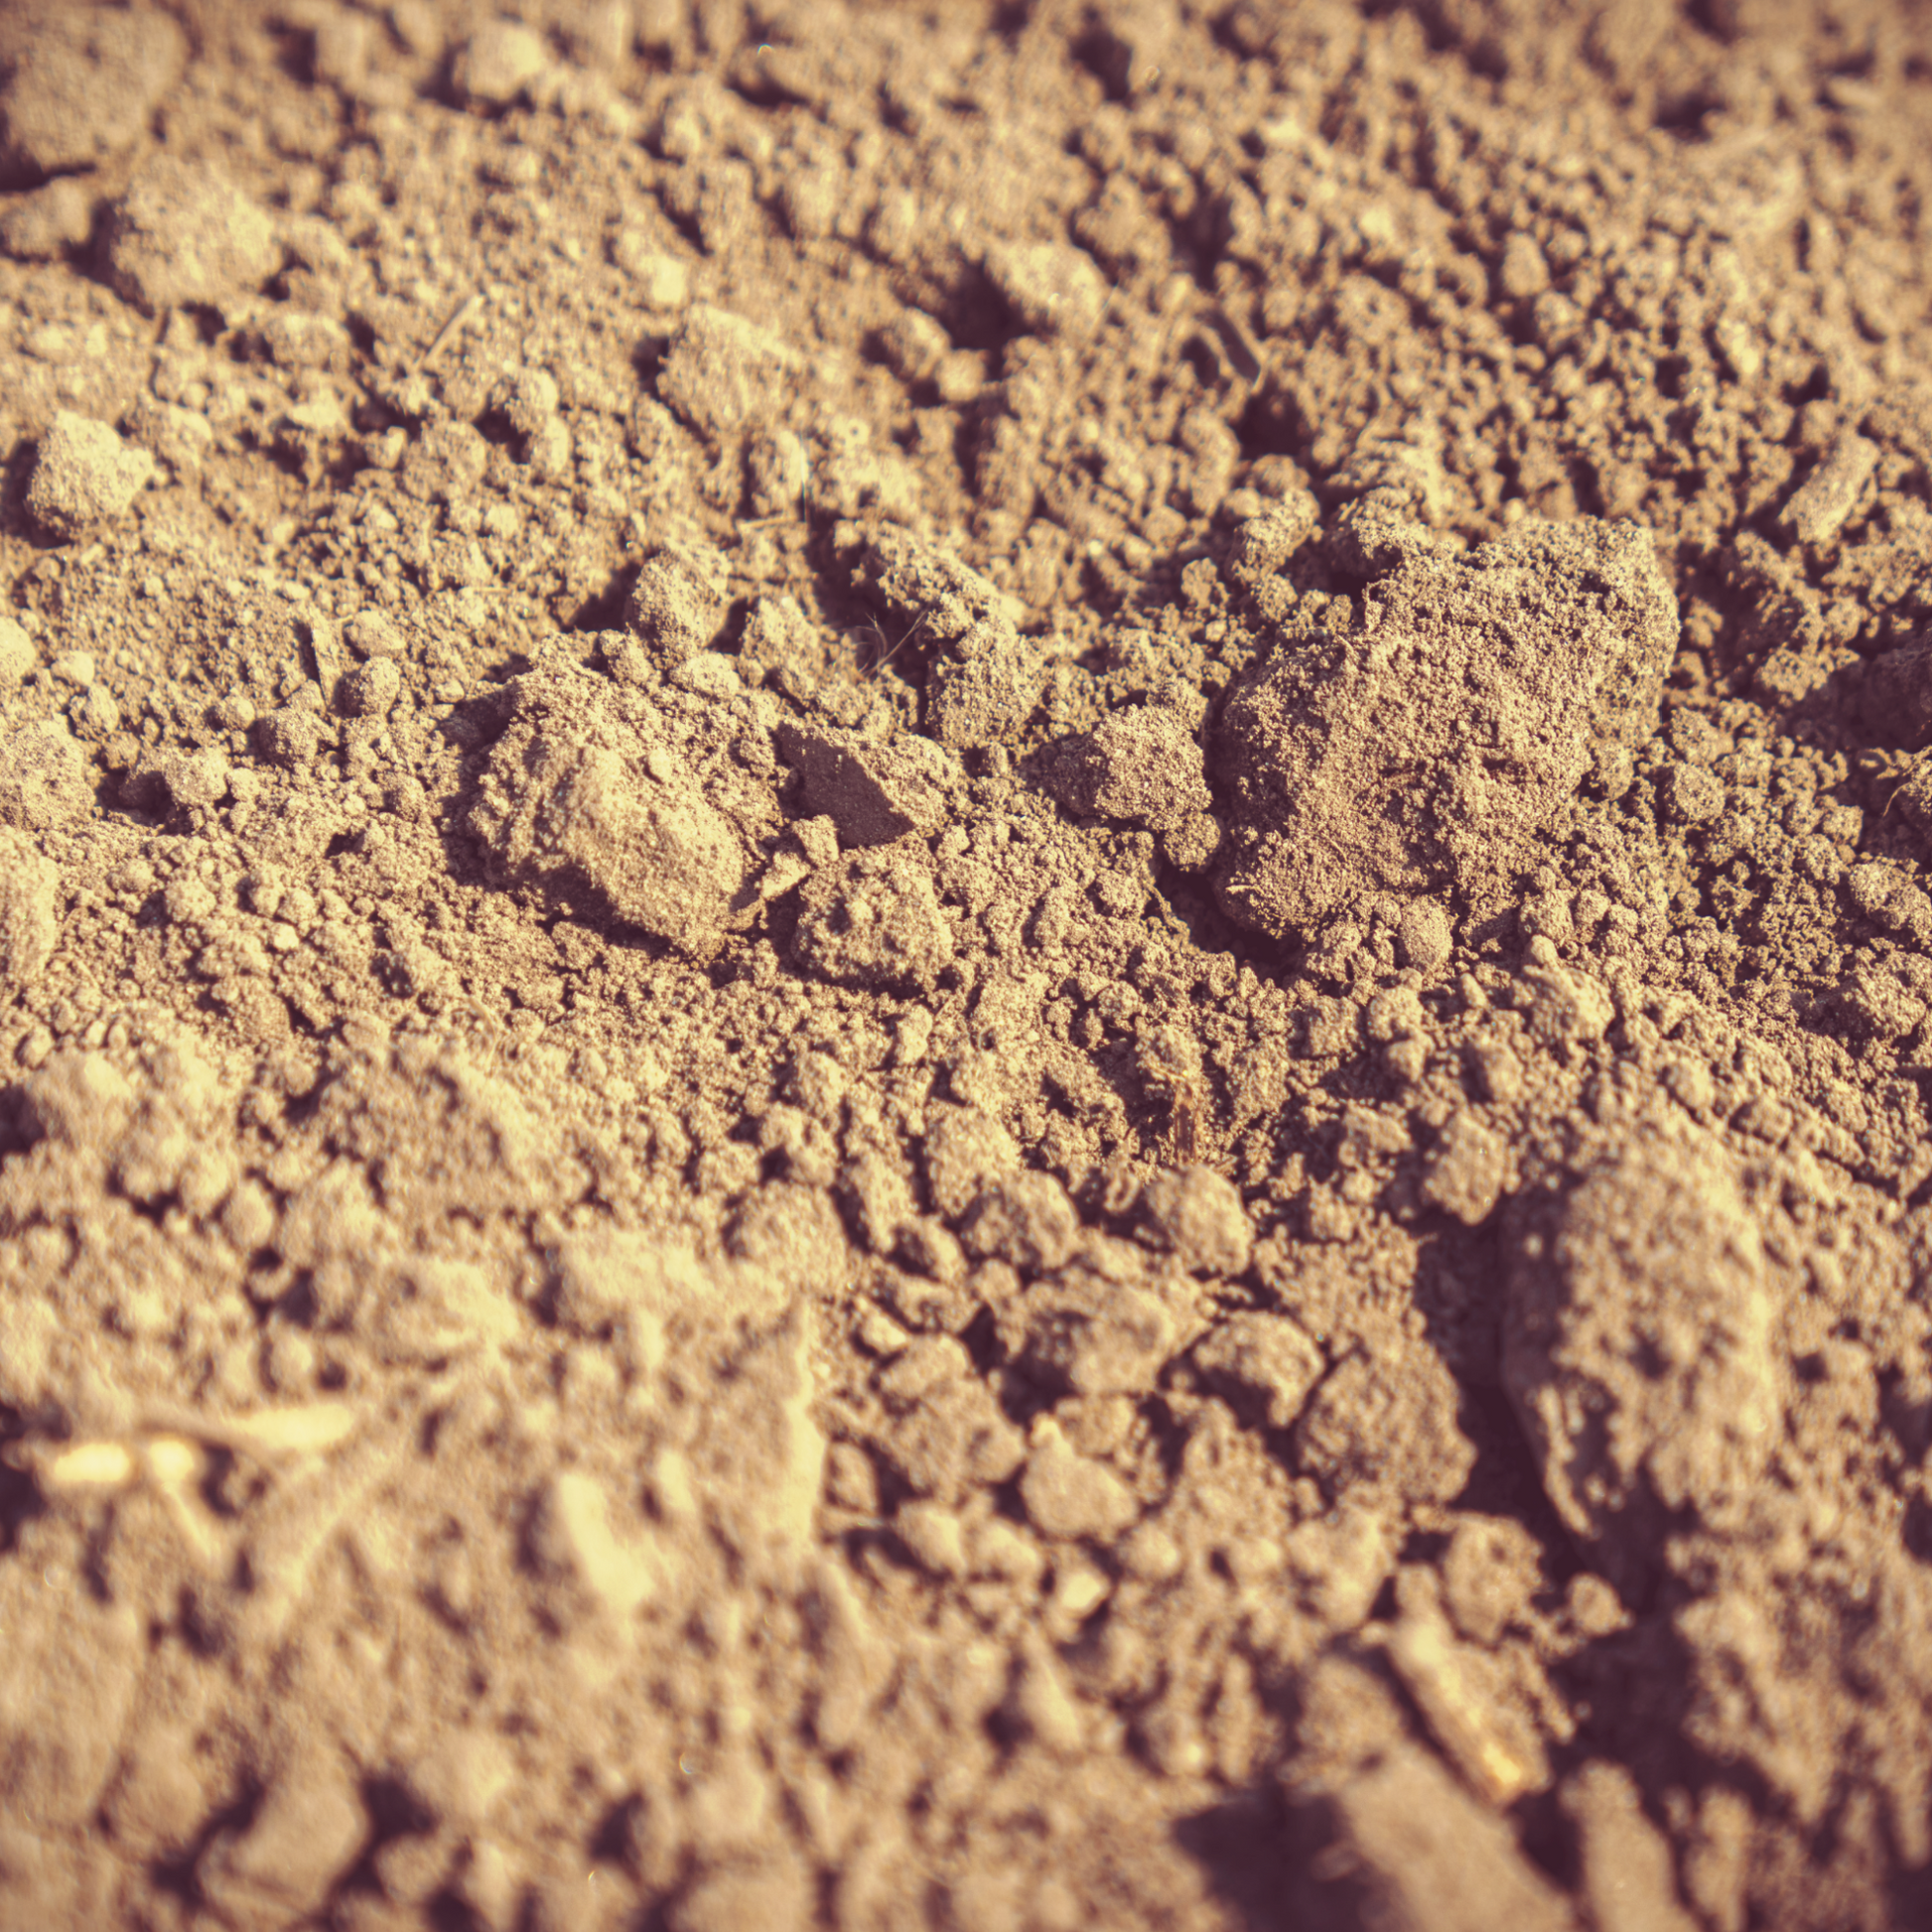 Dry dirt on a sunny day.